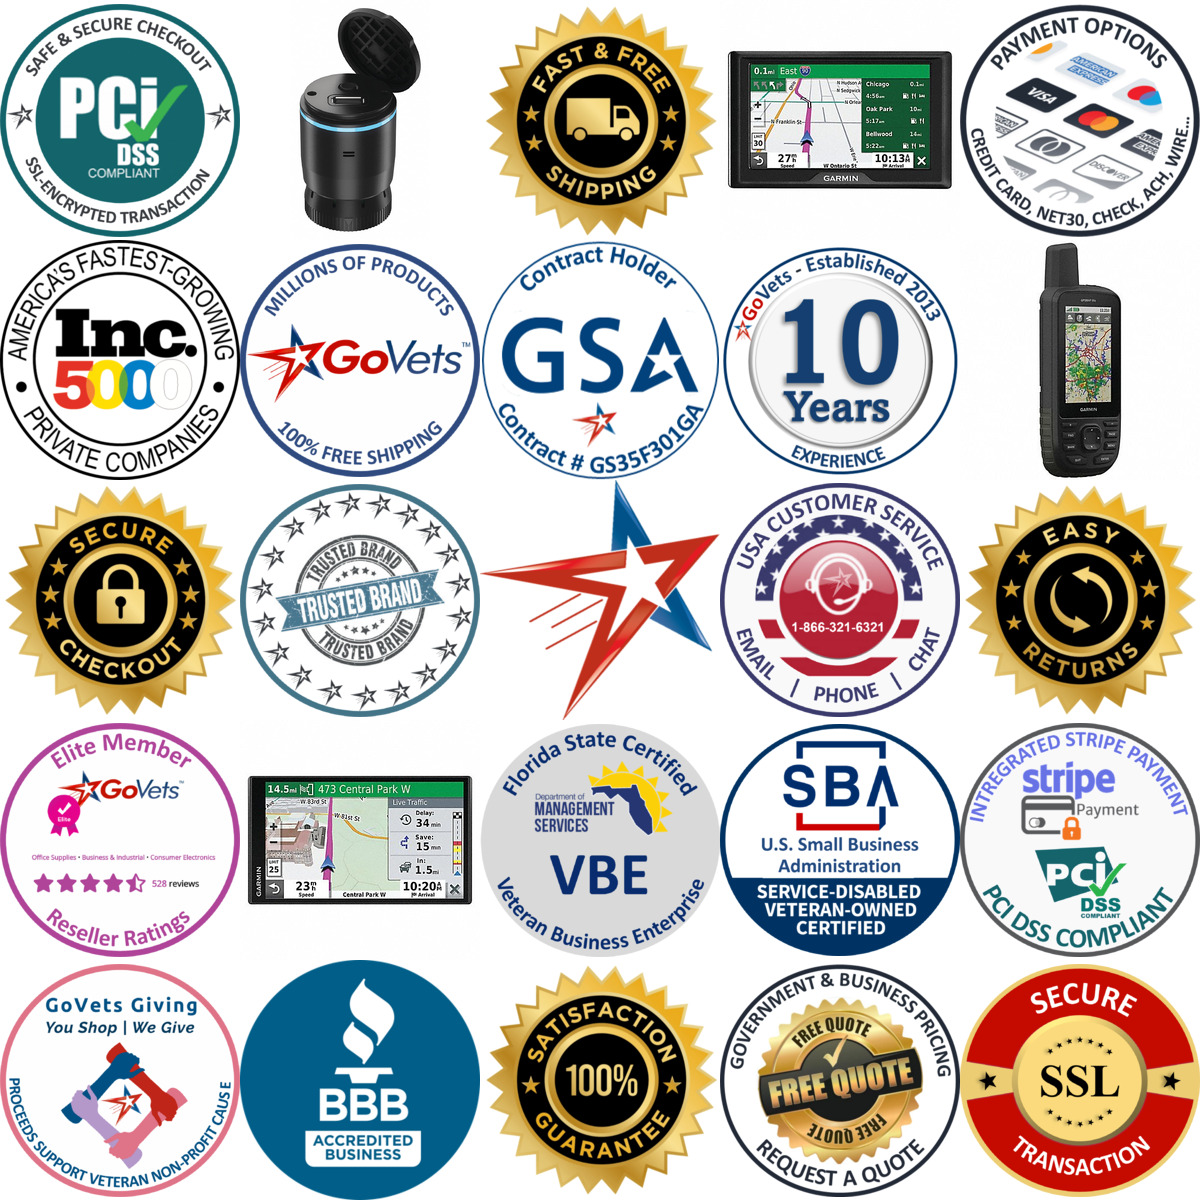 A selection of Gps Navigation Units products on GoVets